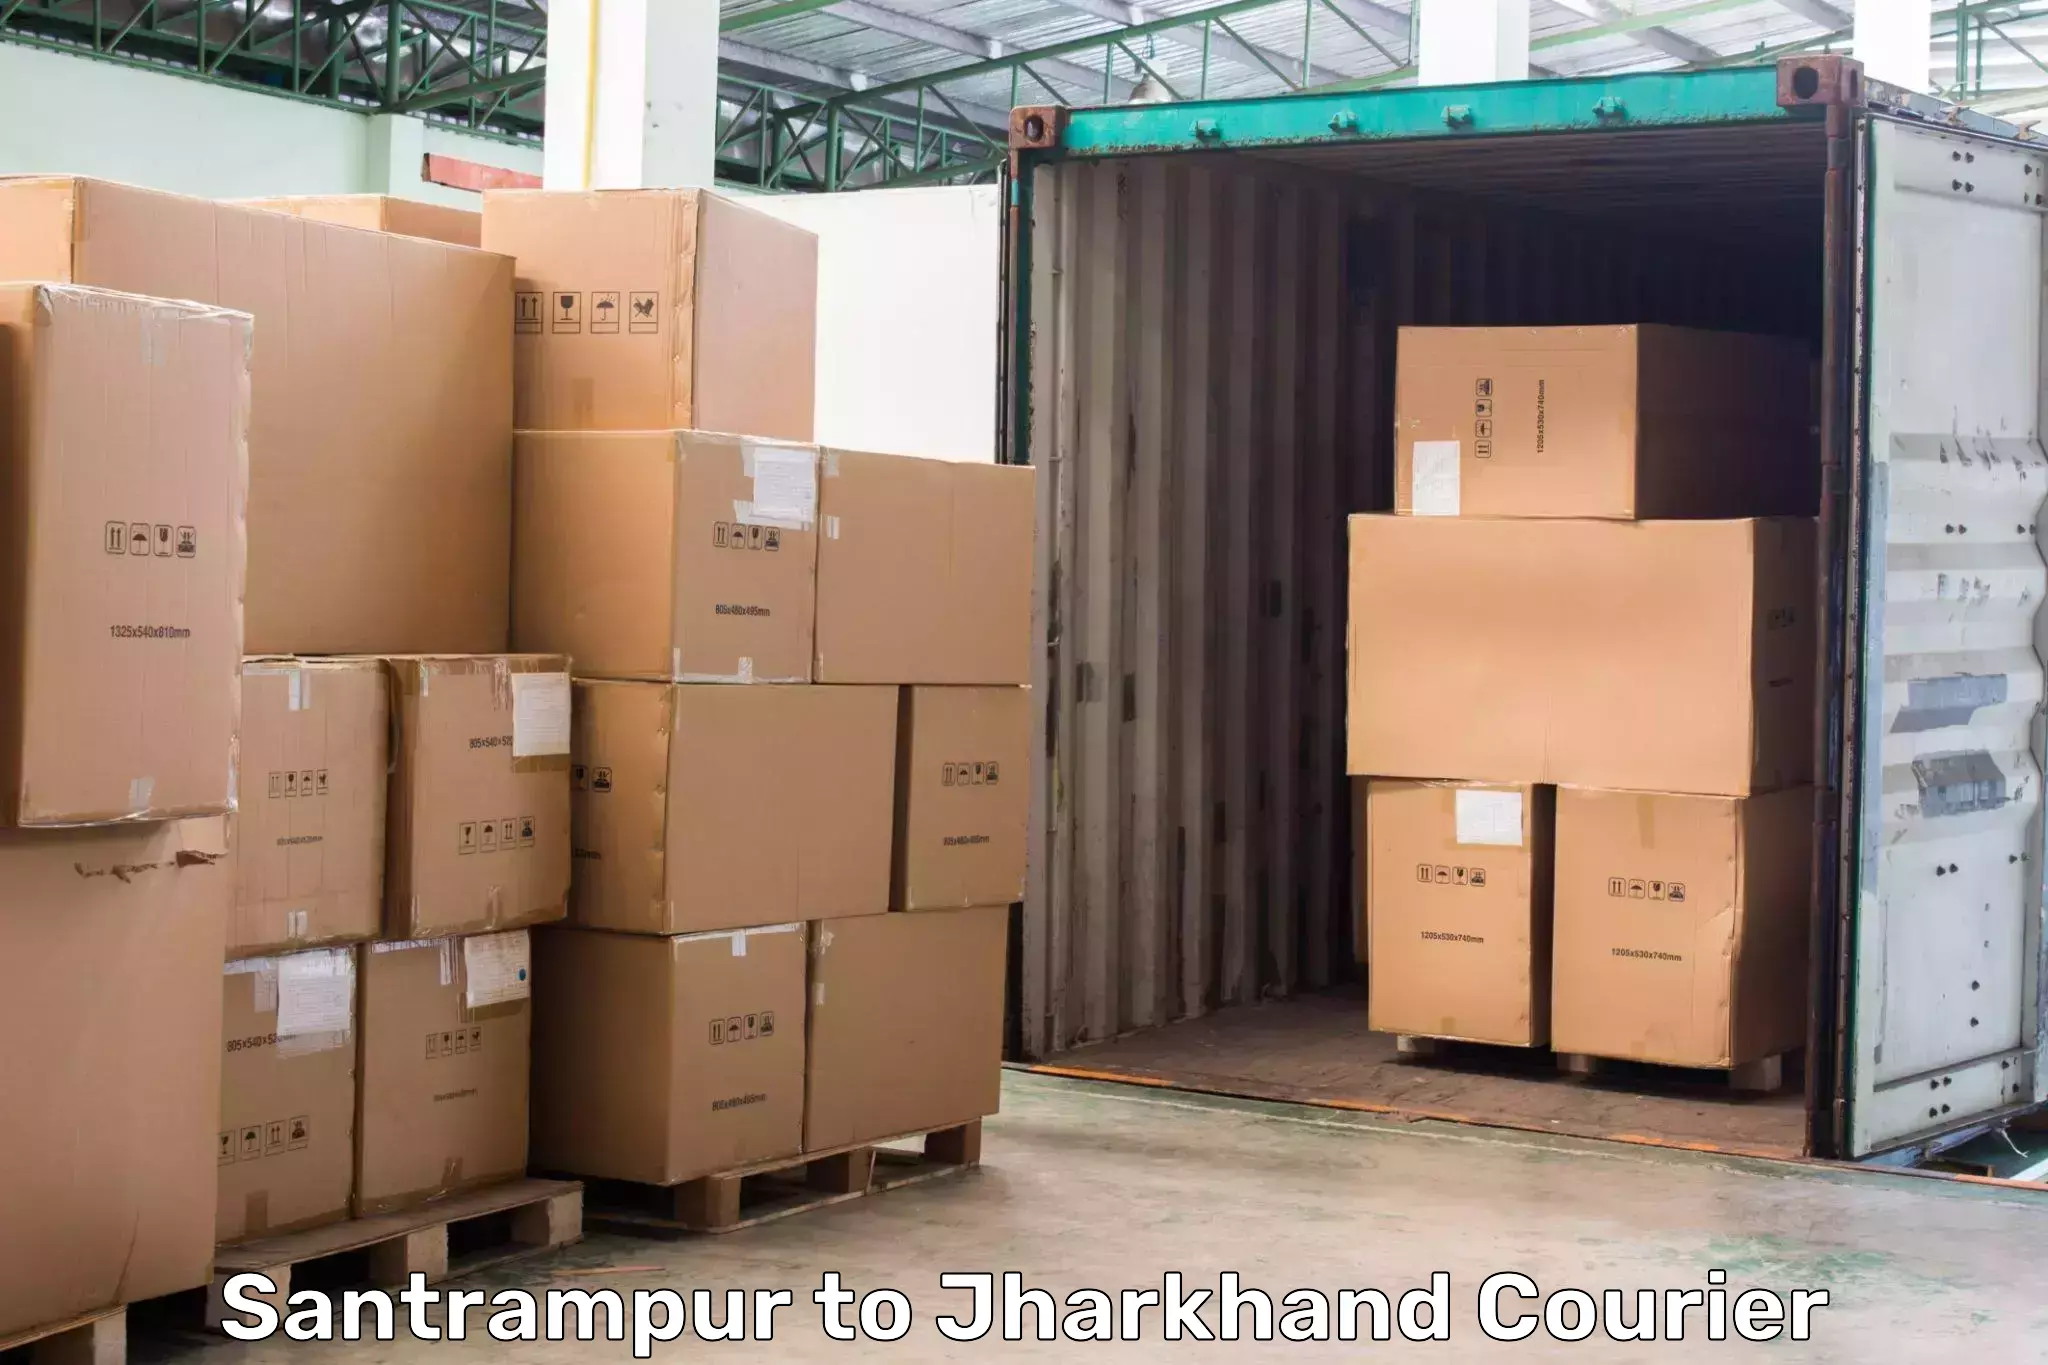 Local courier options Santrampur to Manoharpur